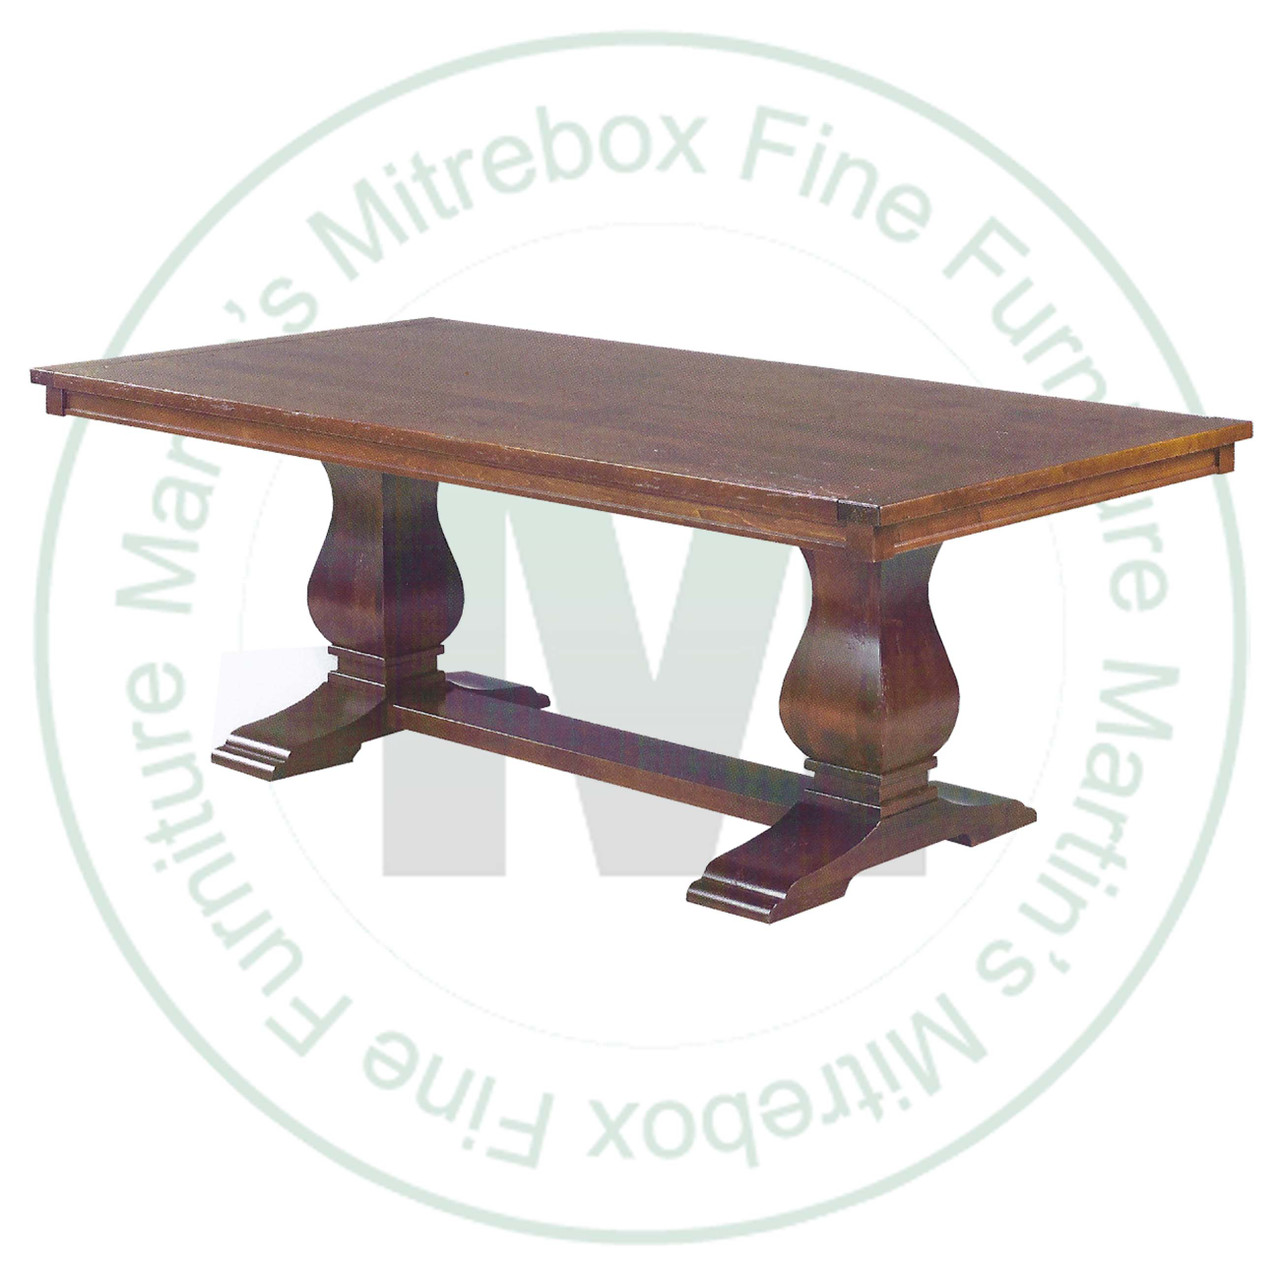 Oak Socrates Double Pedestal Table 42''D x 84''W x 30''H With 2 - 12'' Leaves. Table Has 1.25'' Thick Top